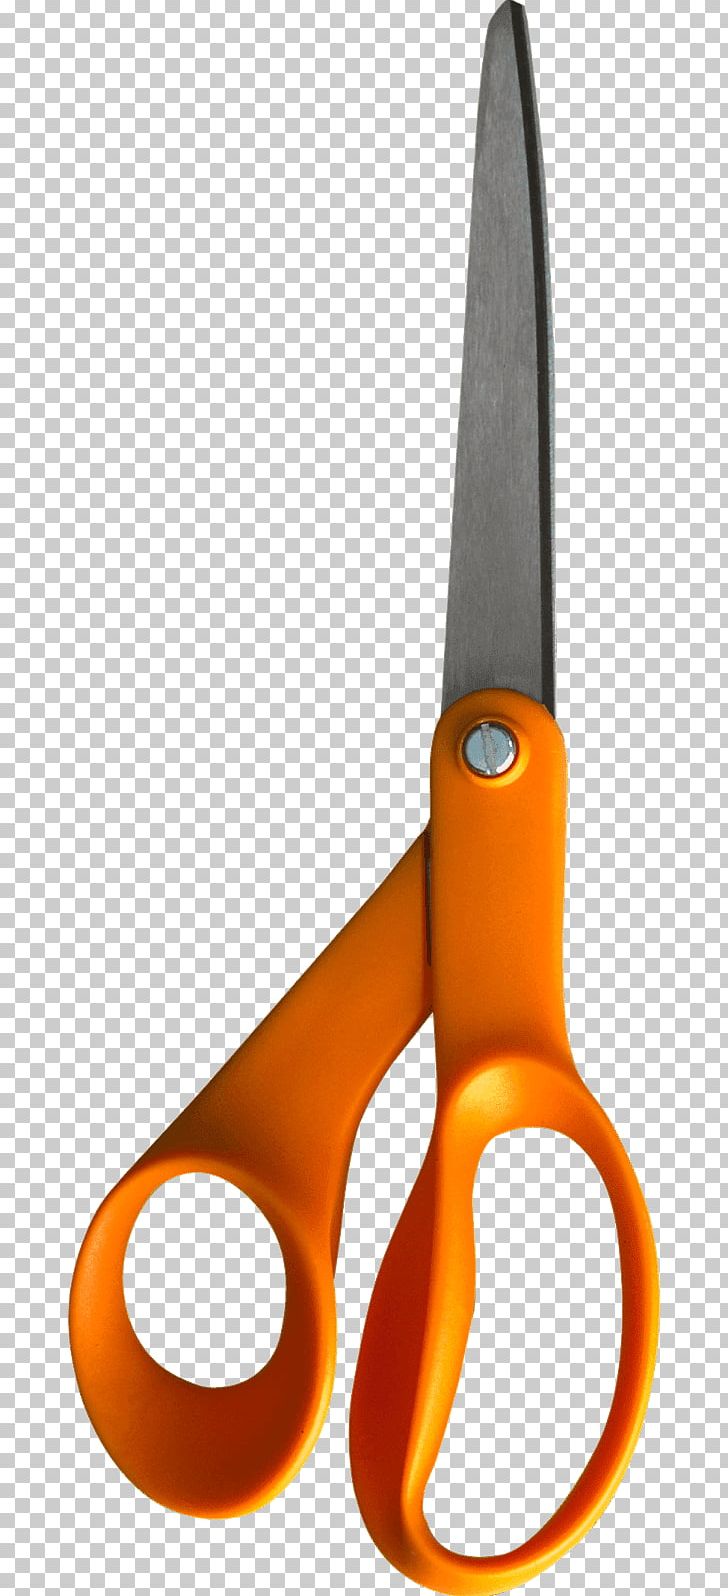 Scissors PhotoScape PNG, Clipart, Clip Art, Digital Image, Download, Gimp, Haircutting Shears Free PNG Download